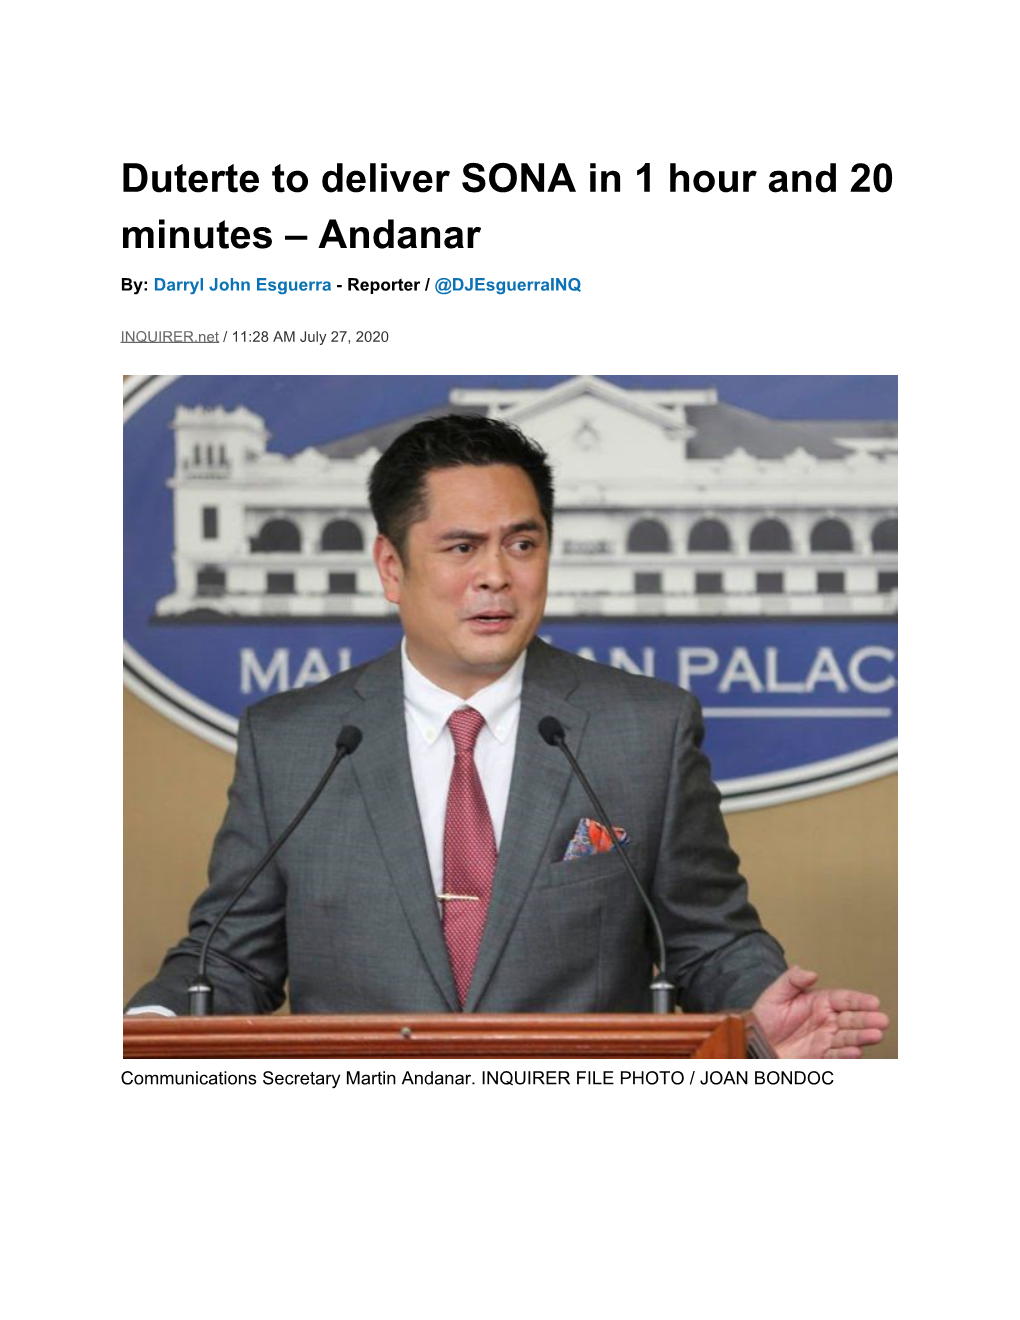 Duterte to Deliver SONA in 1 Hour and 20 Minutes – Andanar